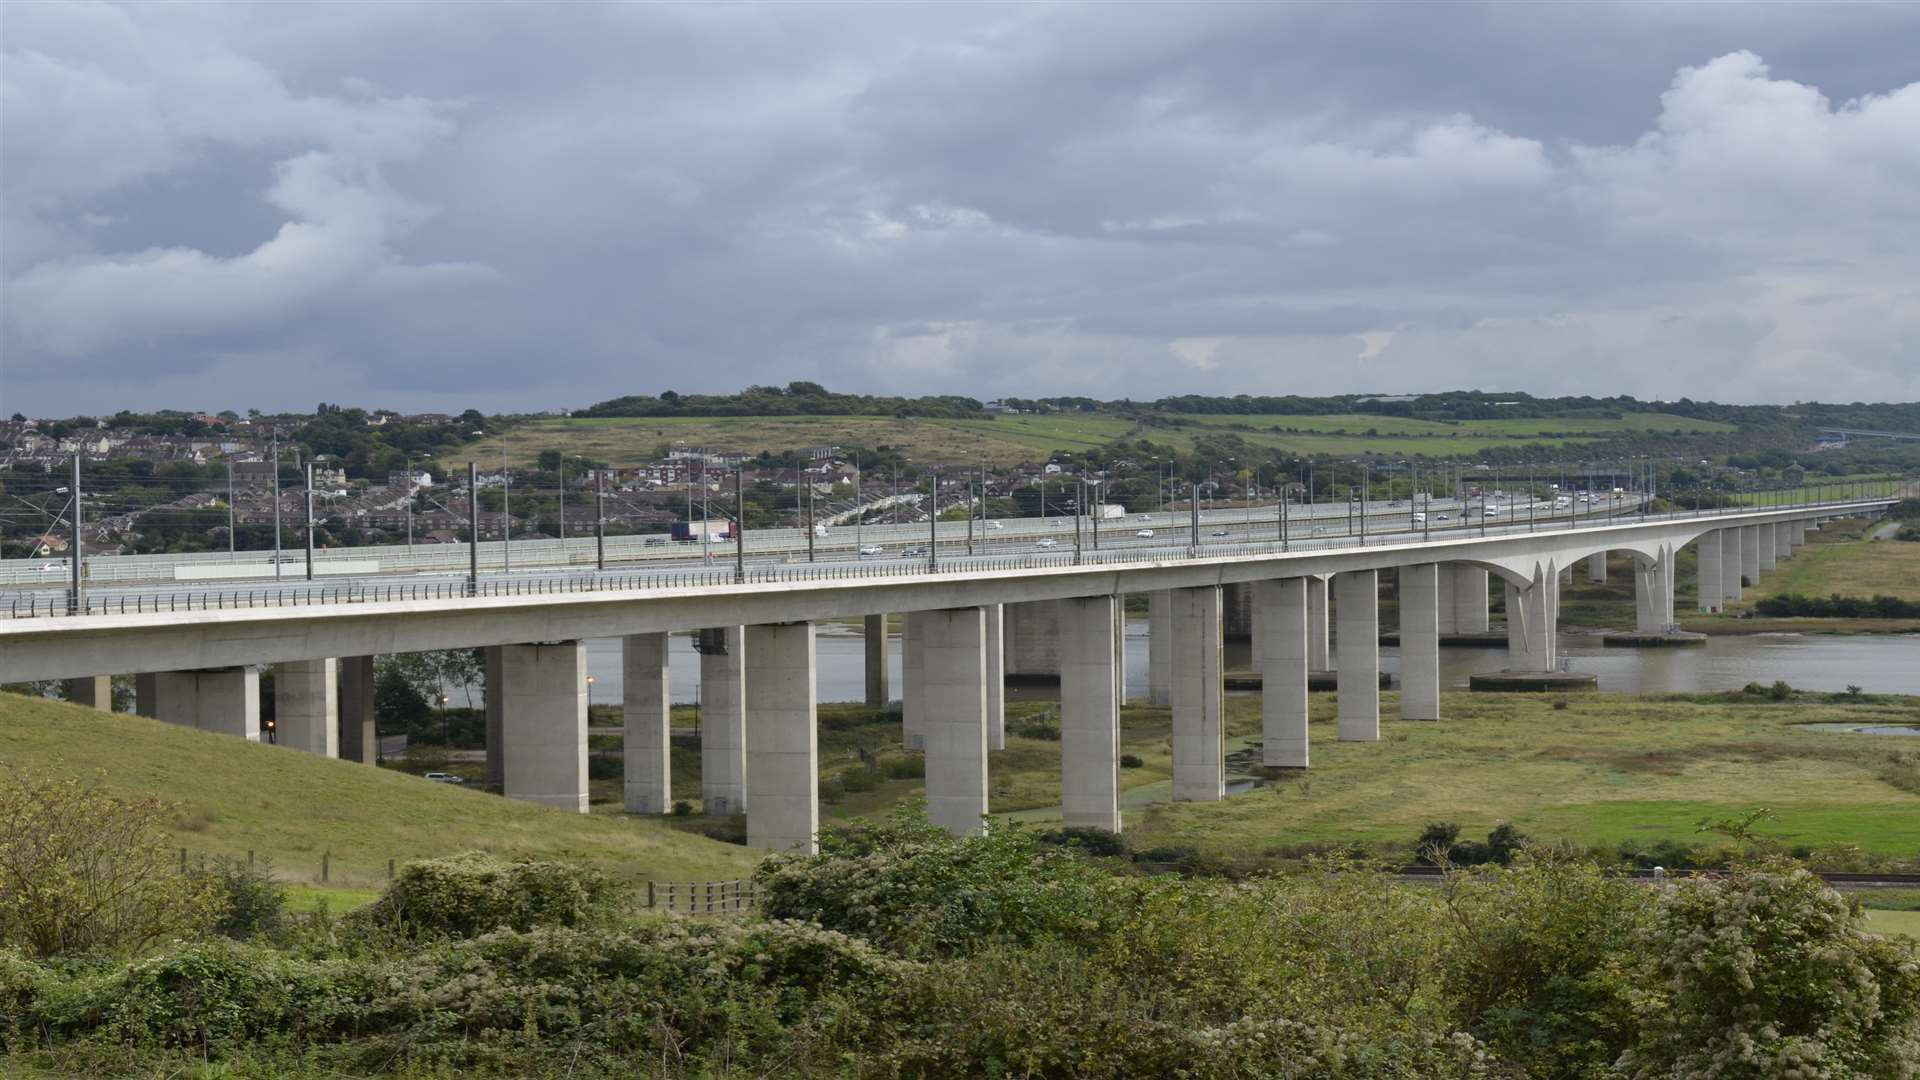 There are delays this weekend because of closures near the Medway Bridge